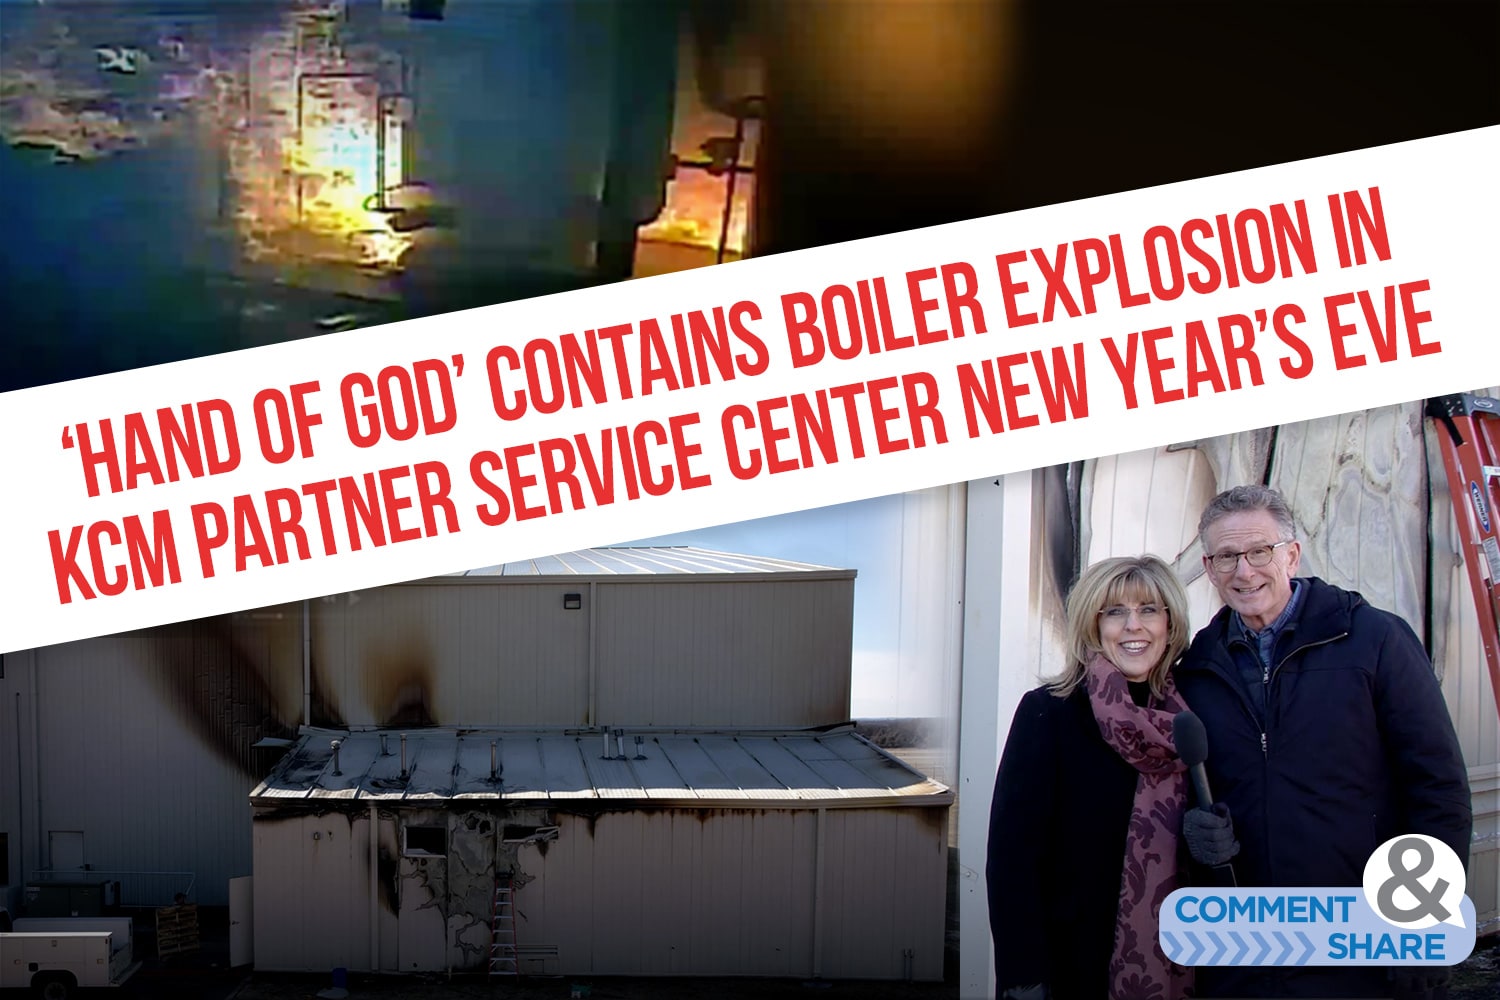 ‘Hand of God’ Contains Boiler Explosion in KCM Partner Service Center New Year’s Eve